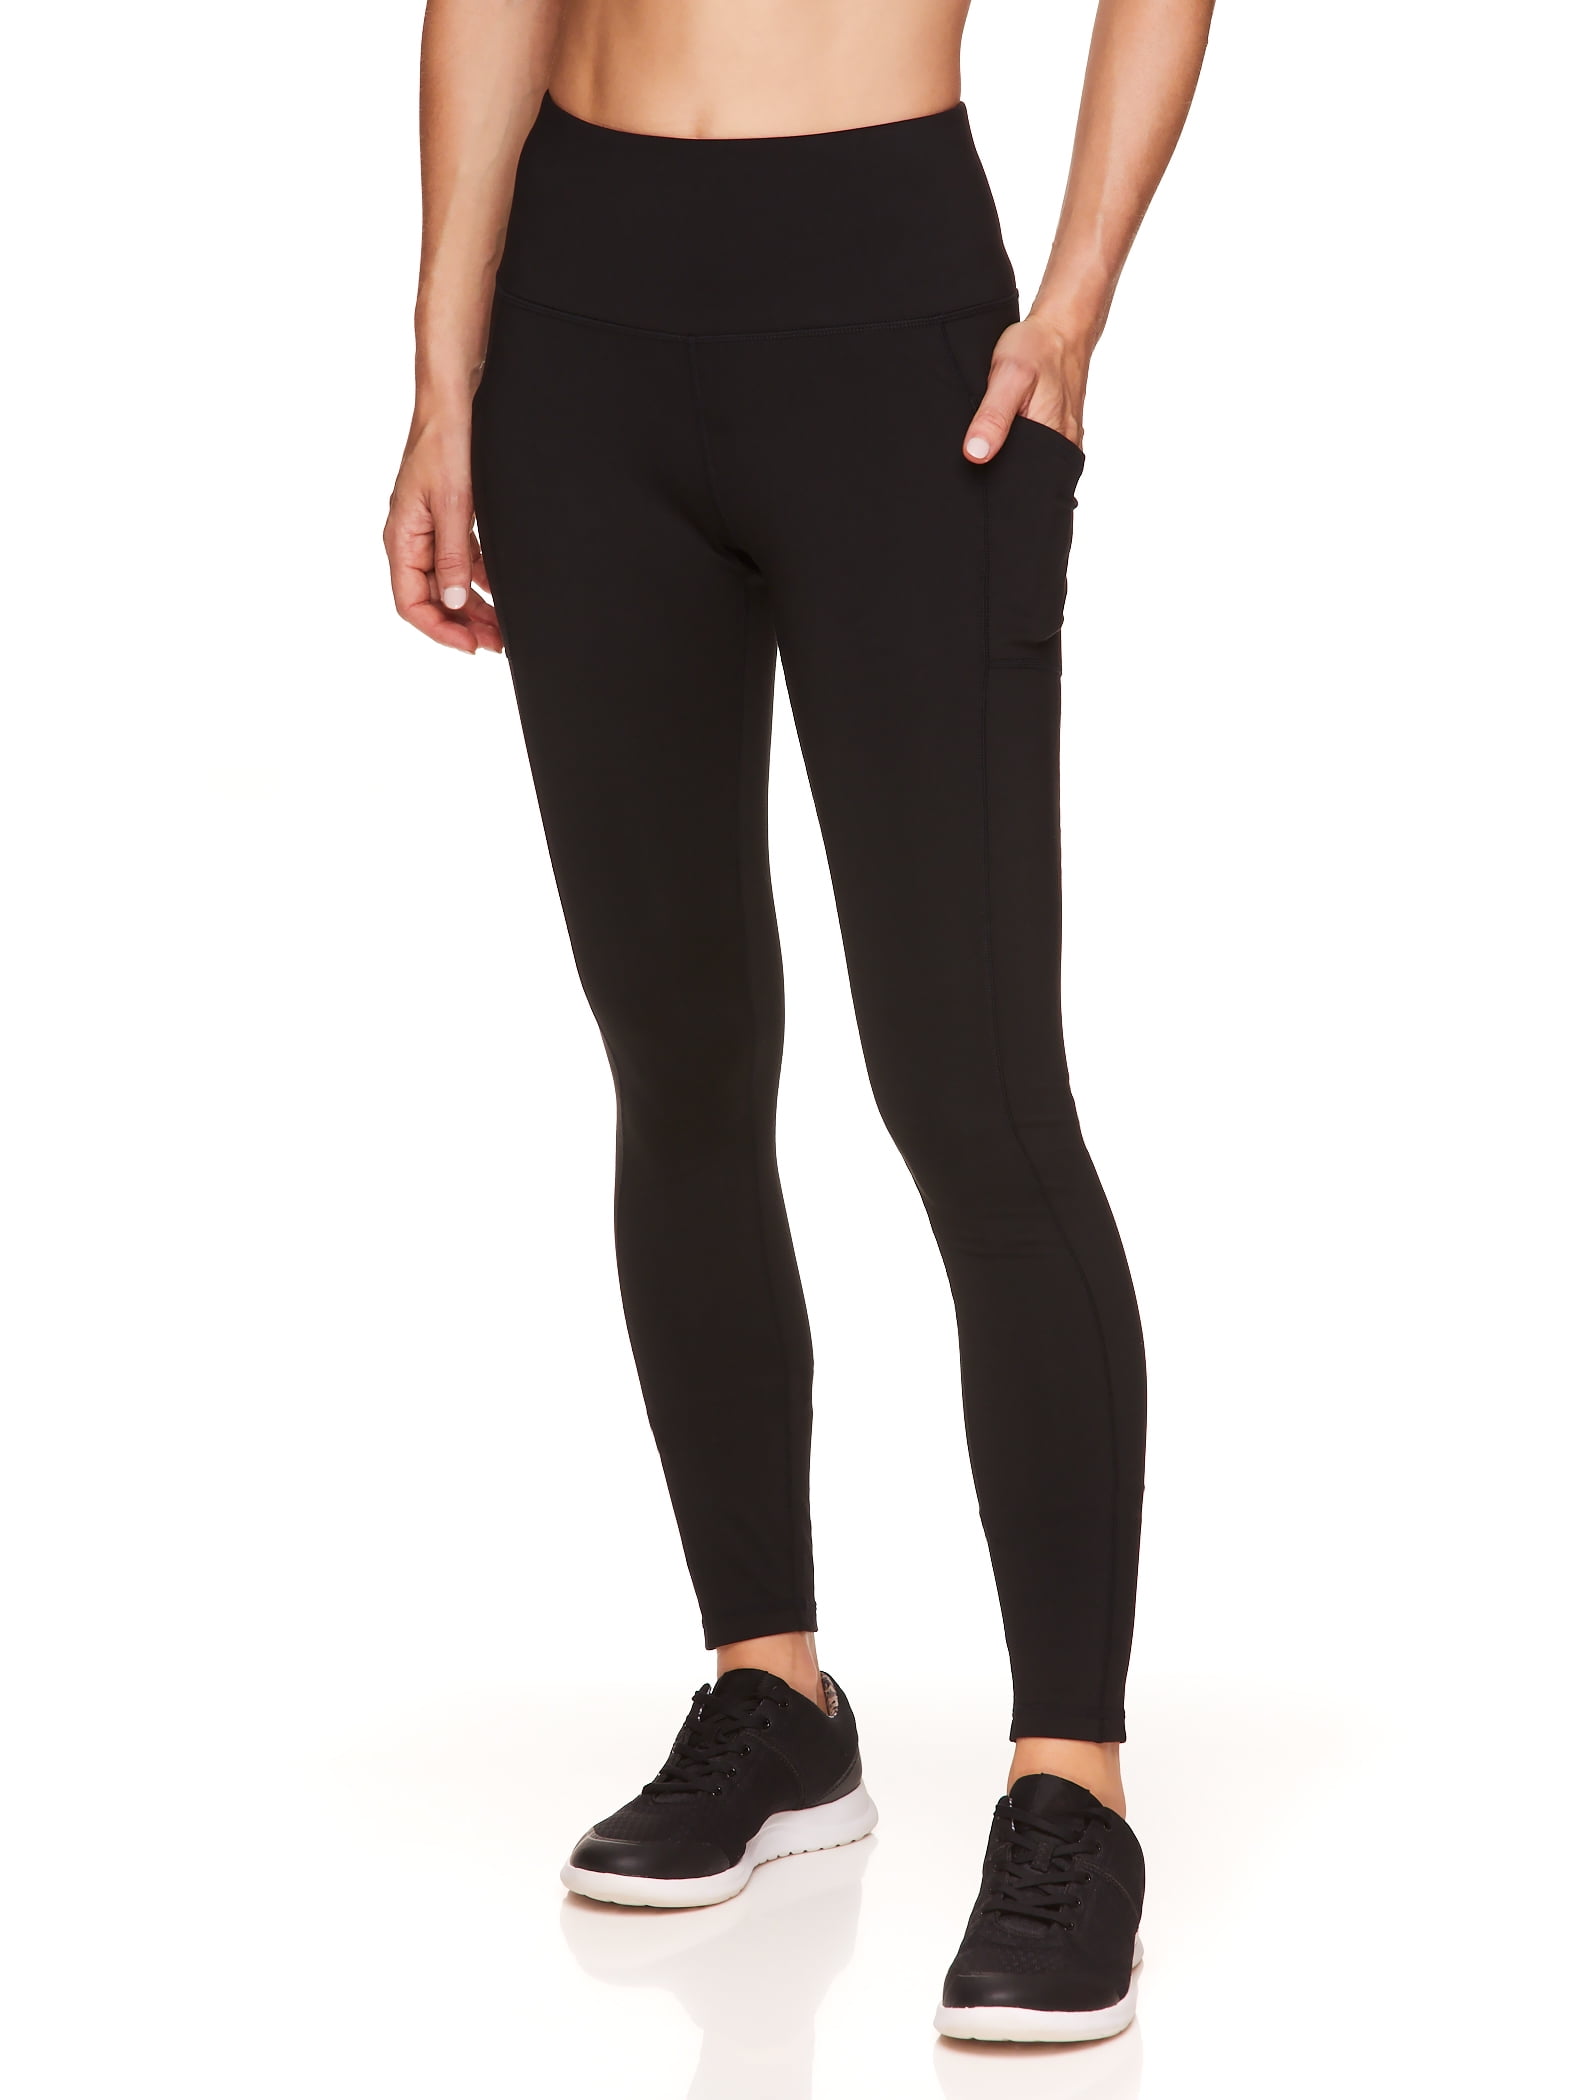 Reebok Everyday High-Waisted Active Leggings with Pockets, 28" Inseam